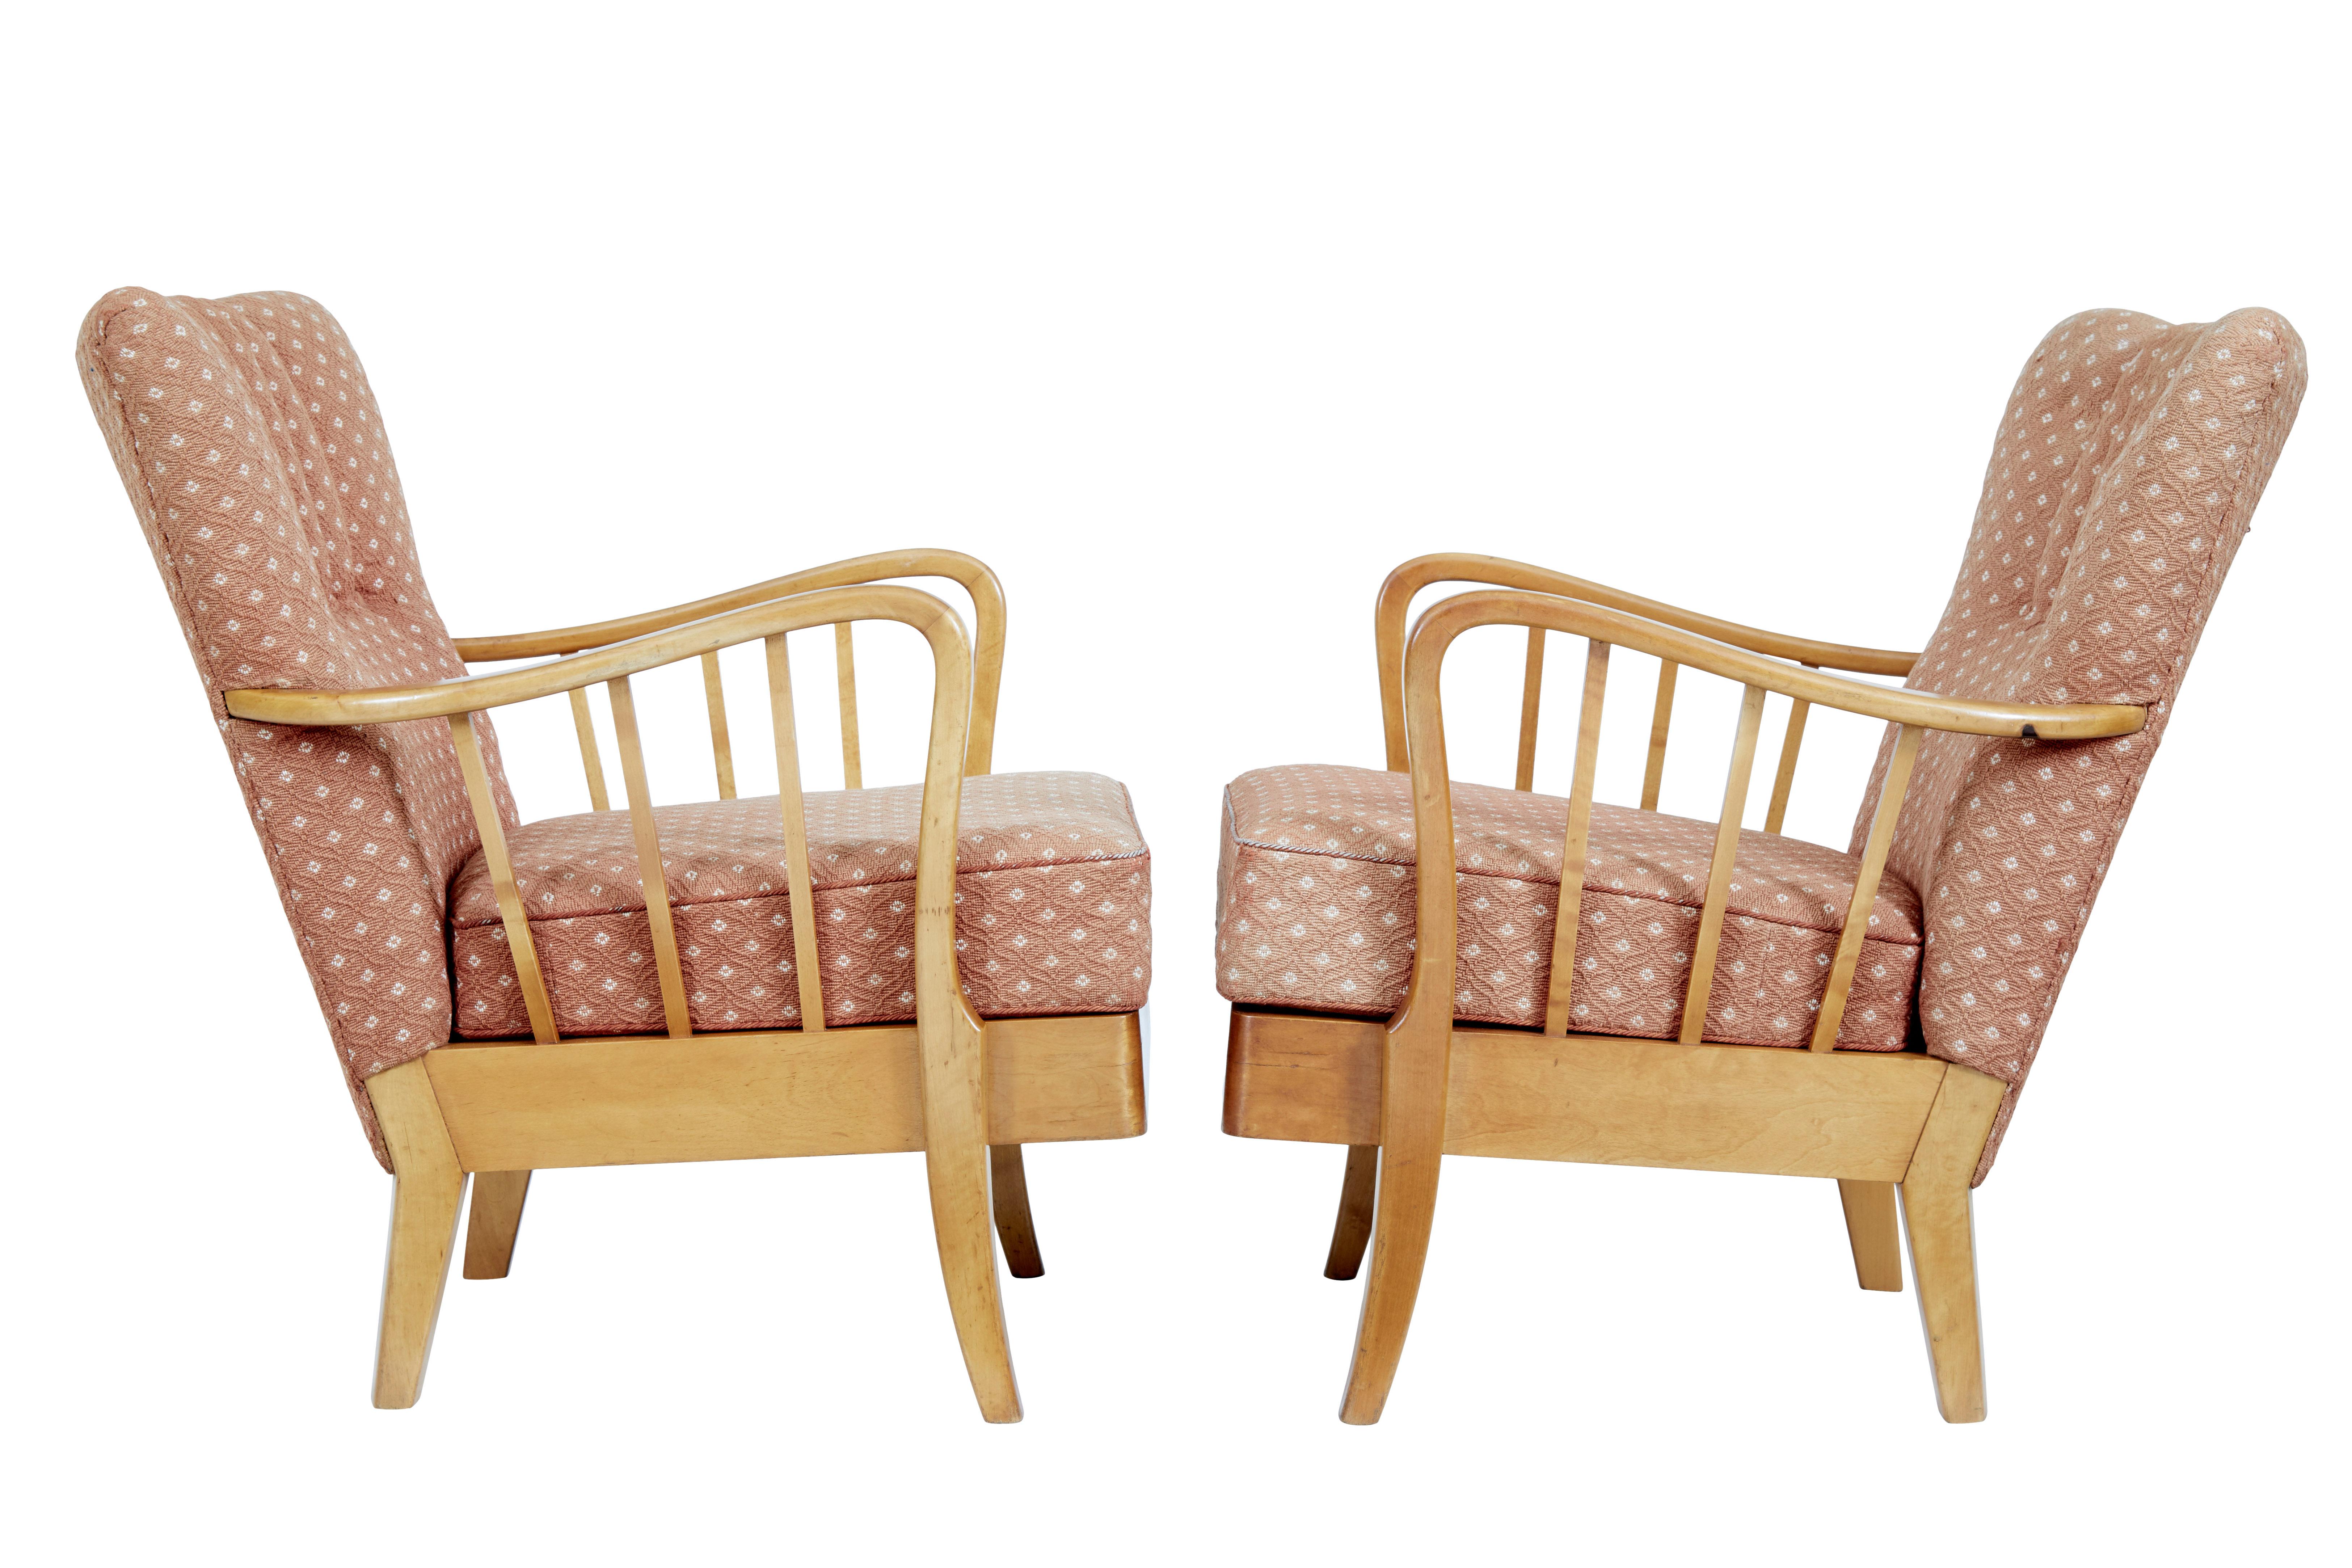 Hand-Crafted Pair of Mid 20th Century Swedish Birch Armchairs